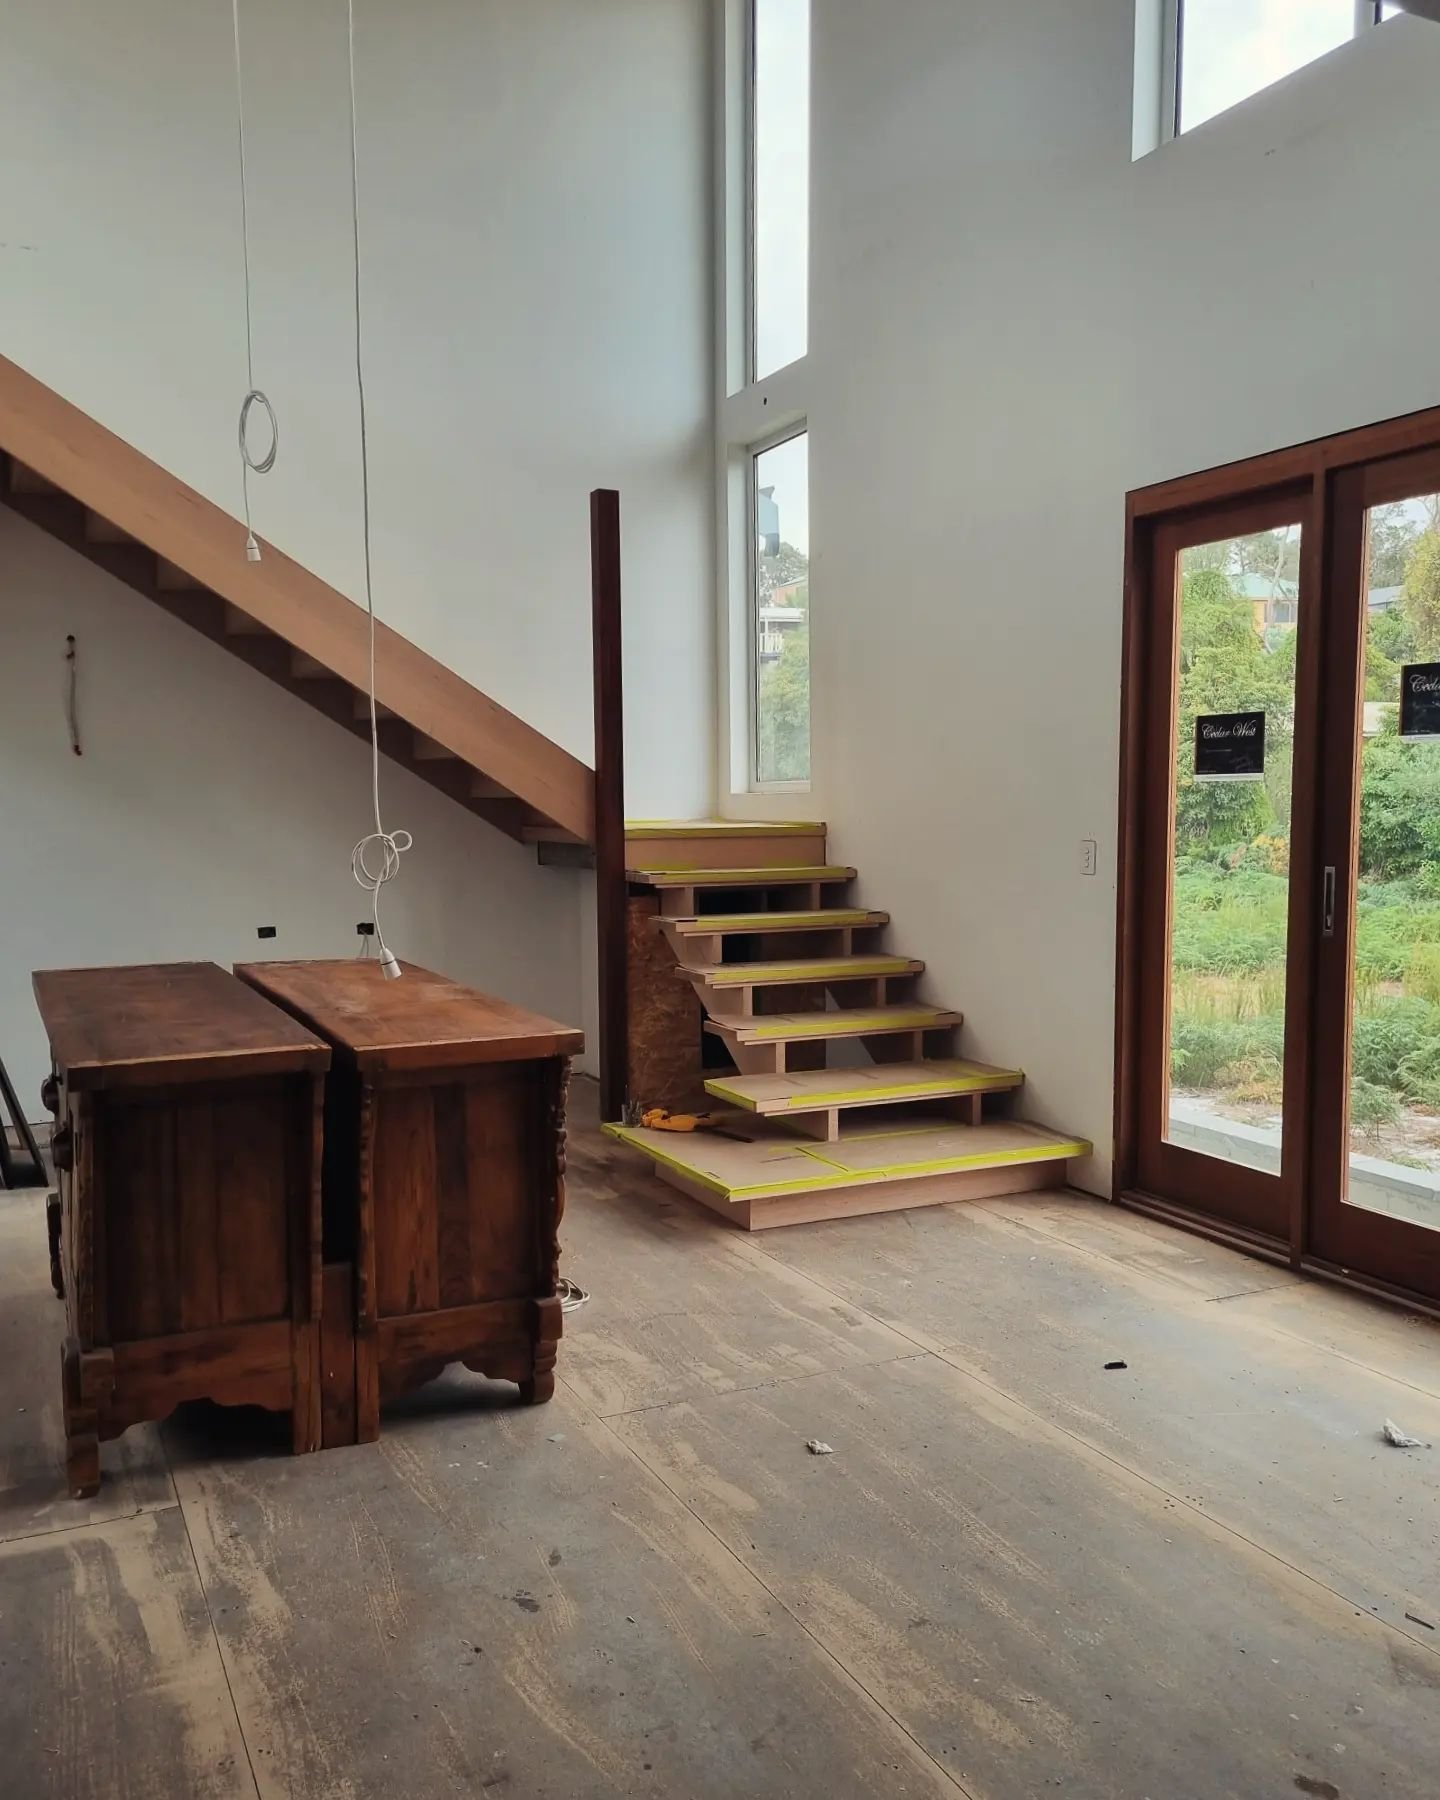 The stairs are in, and the space is coming together. Love all the colours and textures.
.
.
.
.
.
.
.
.
.
.
.
.
#schlagerarchitects #homeinspiration #homeinspo #housebeautiful #homedesign #homedecor #dreamhome #interiors #interiordesign #interiorinsp